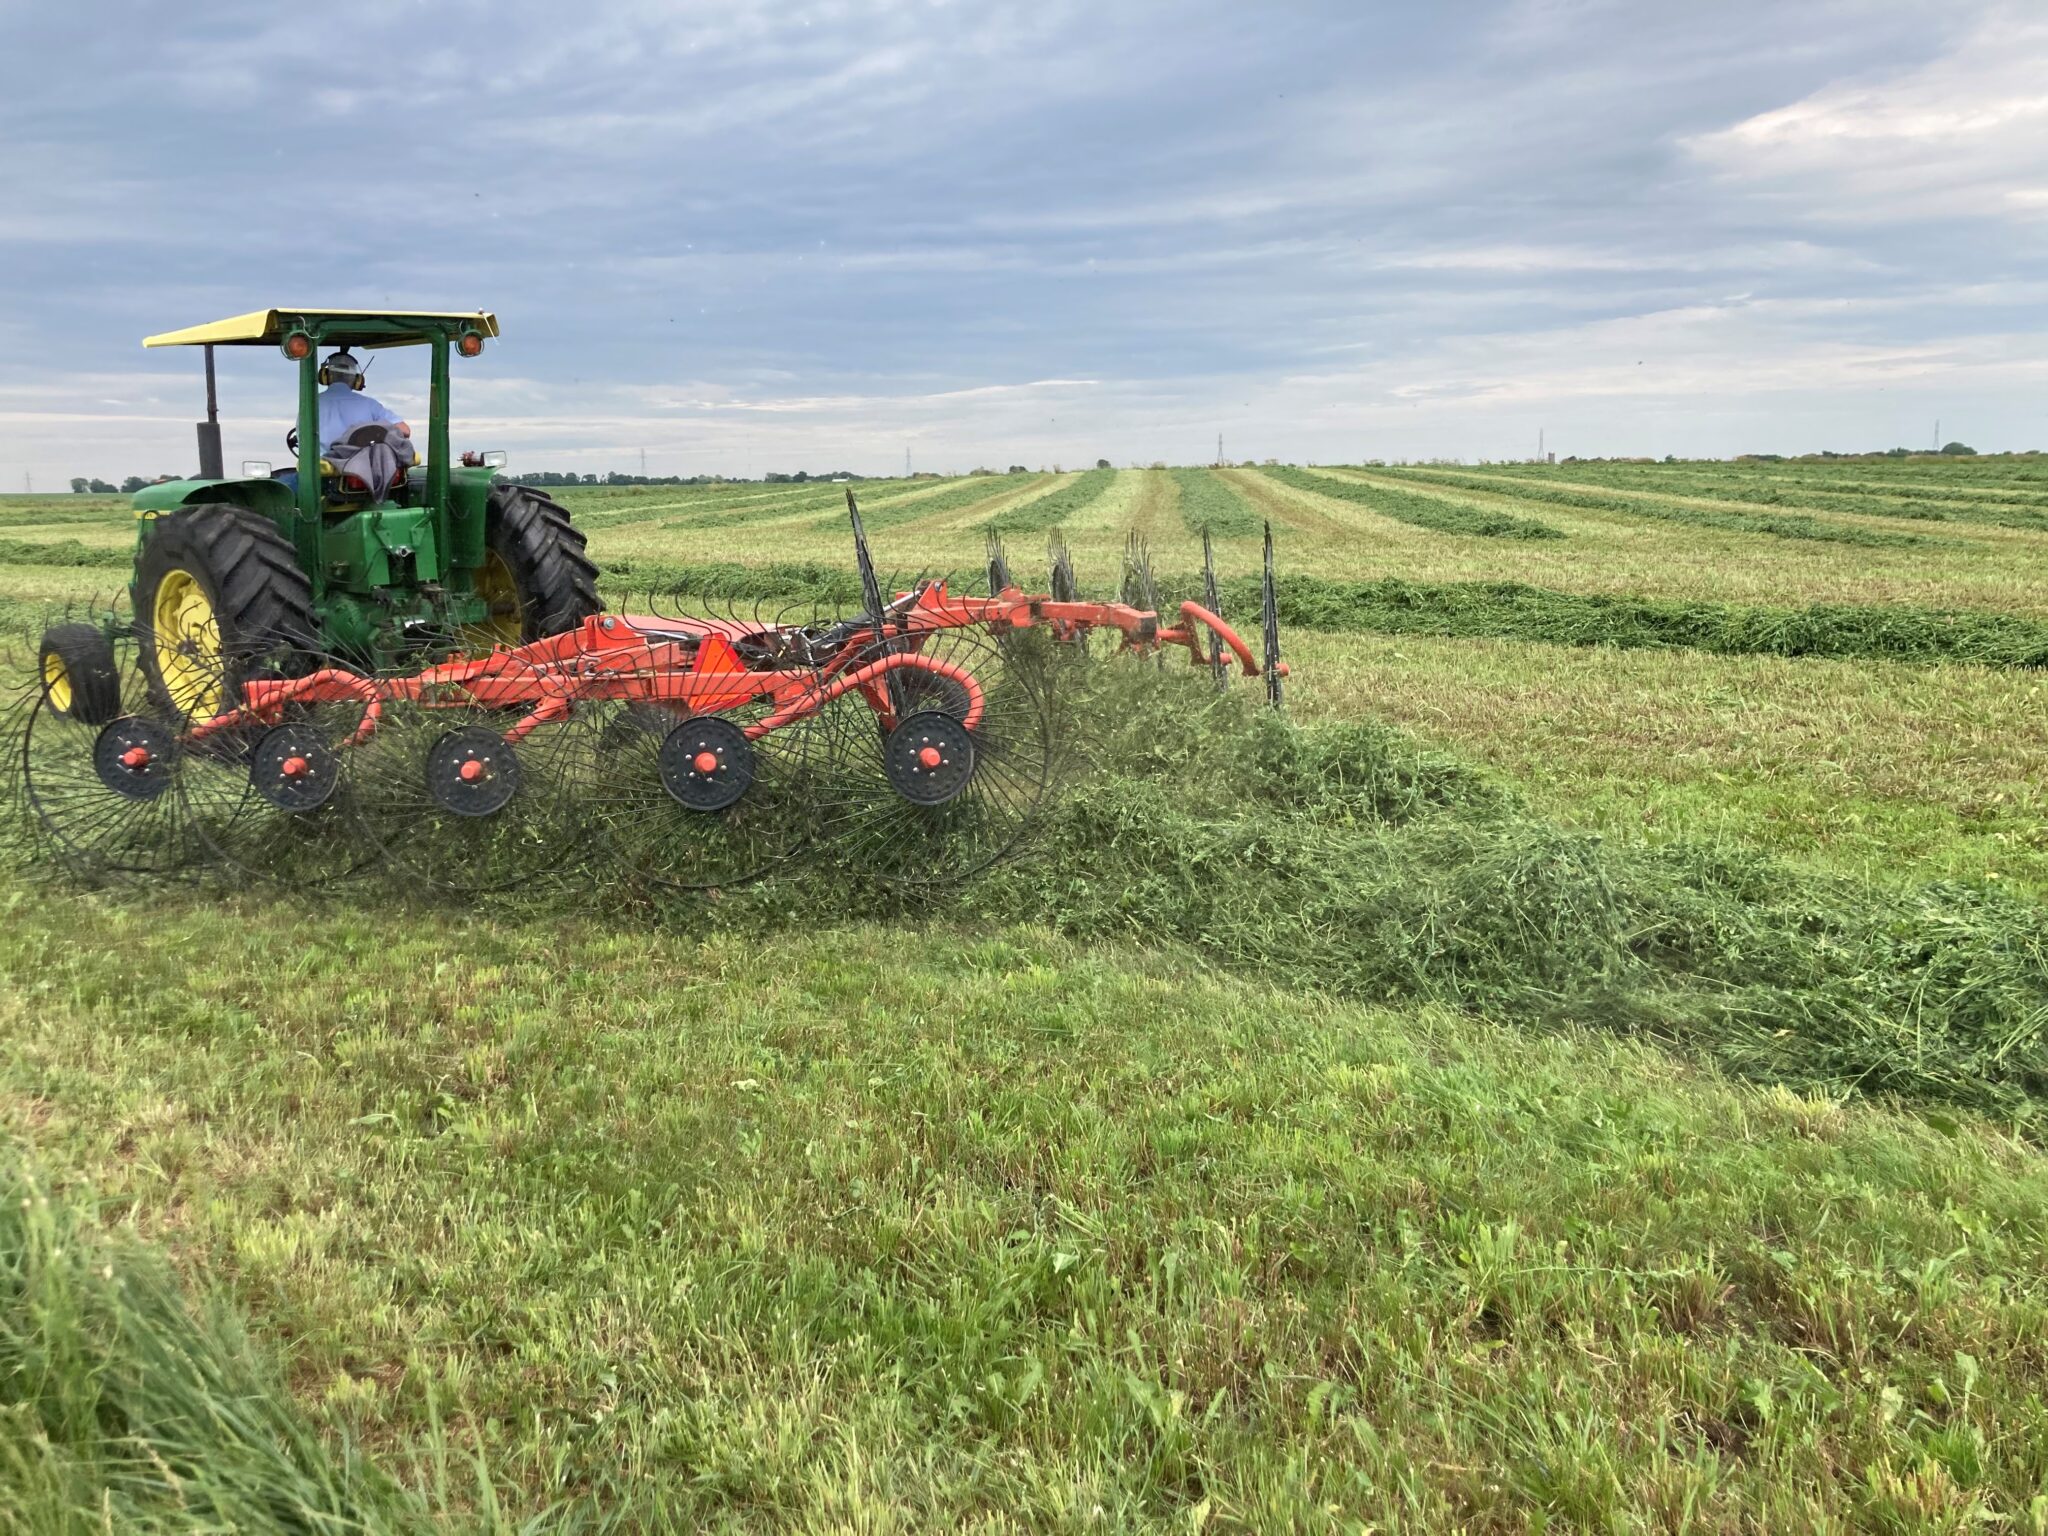 Narrow swaths being merged into a windrow for chopping